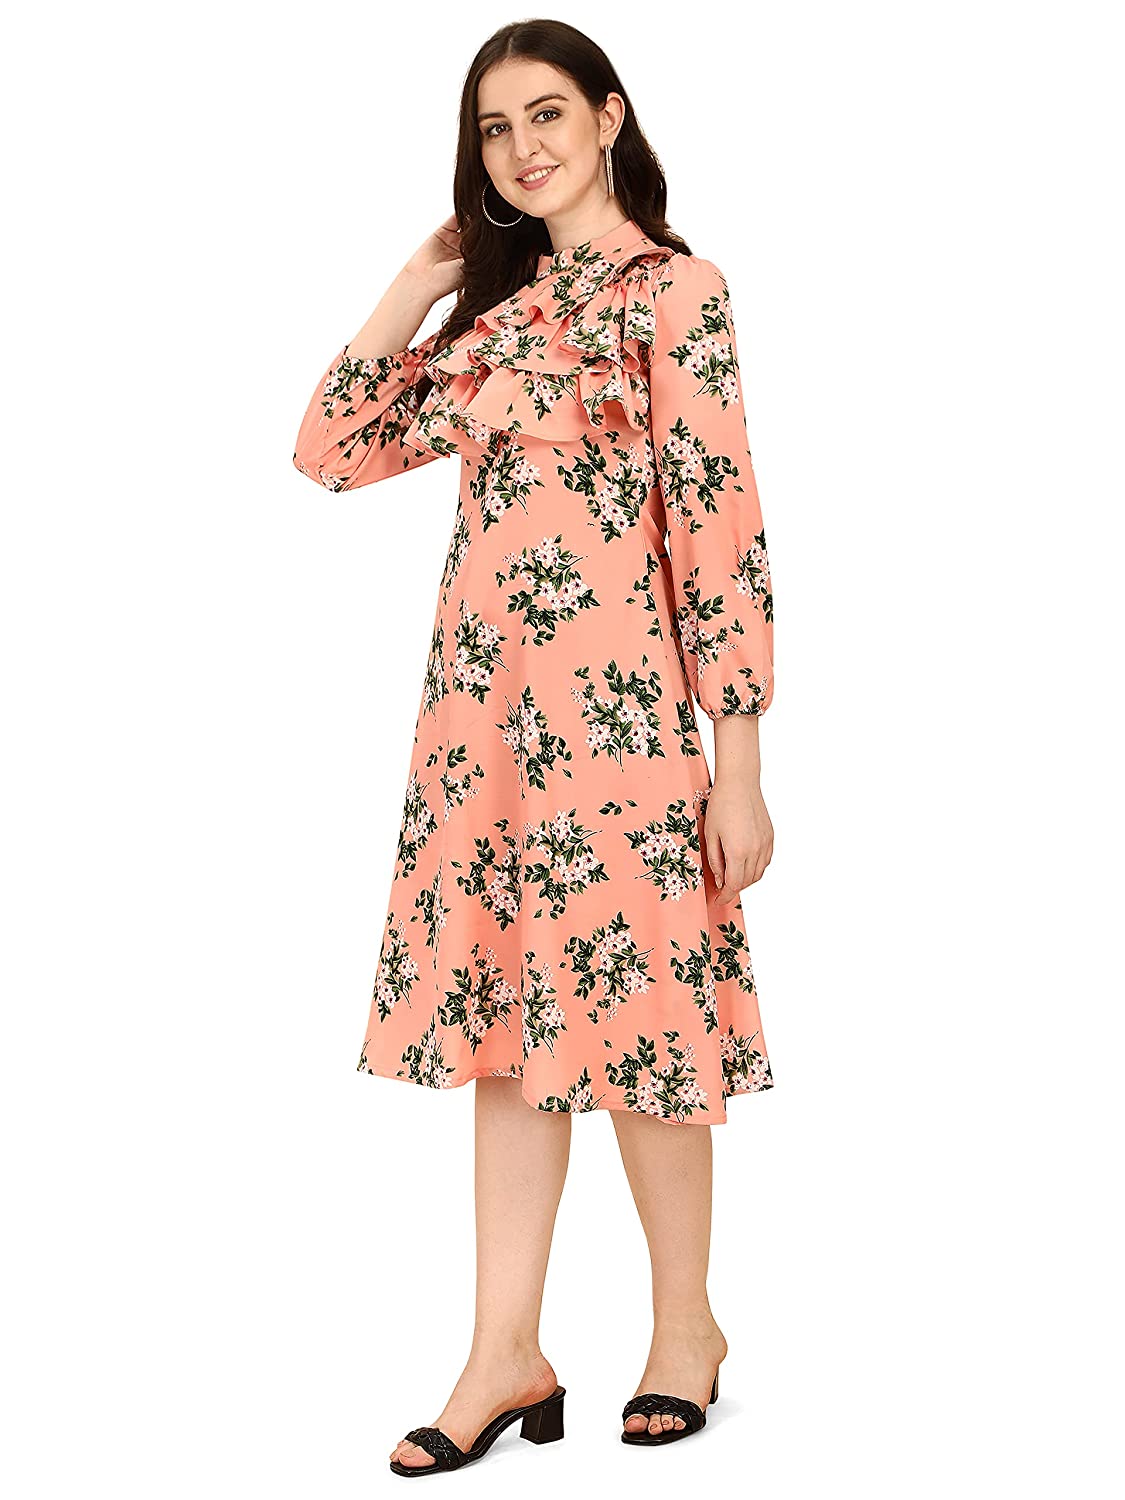 OOMPH! Women Dress -  DRESSES in Sri Lanka from Arcade Online Shopping - Just Rs. 4699!